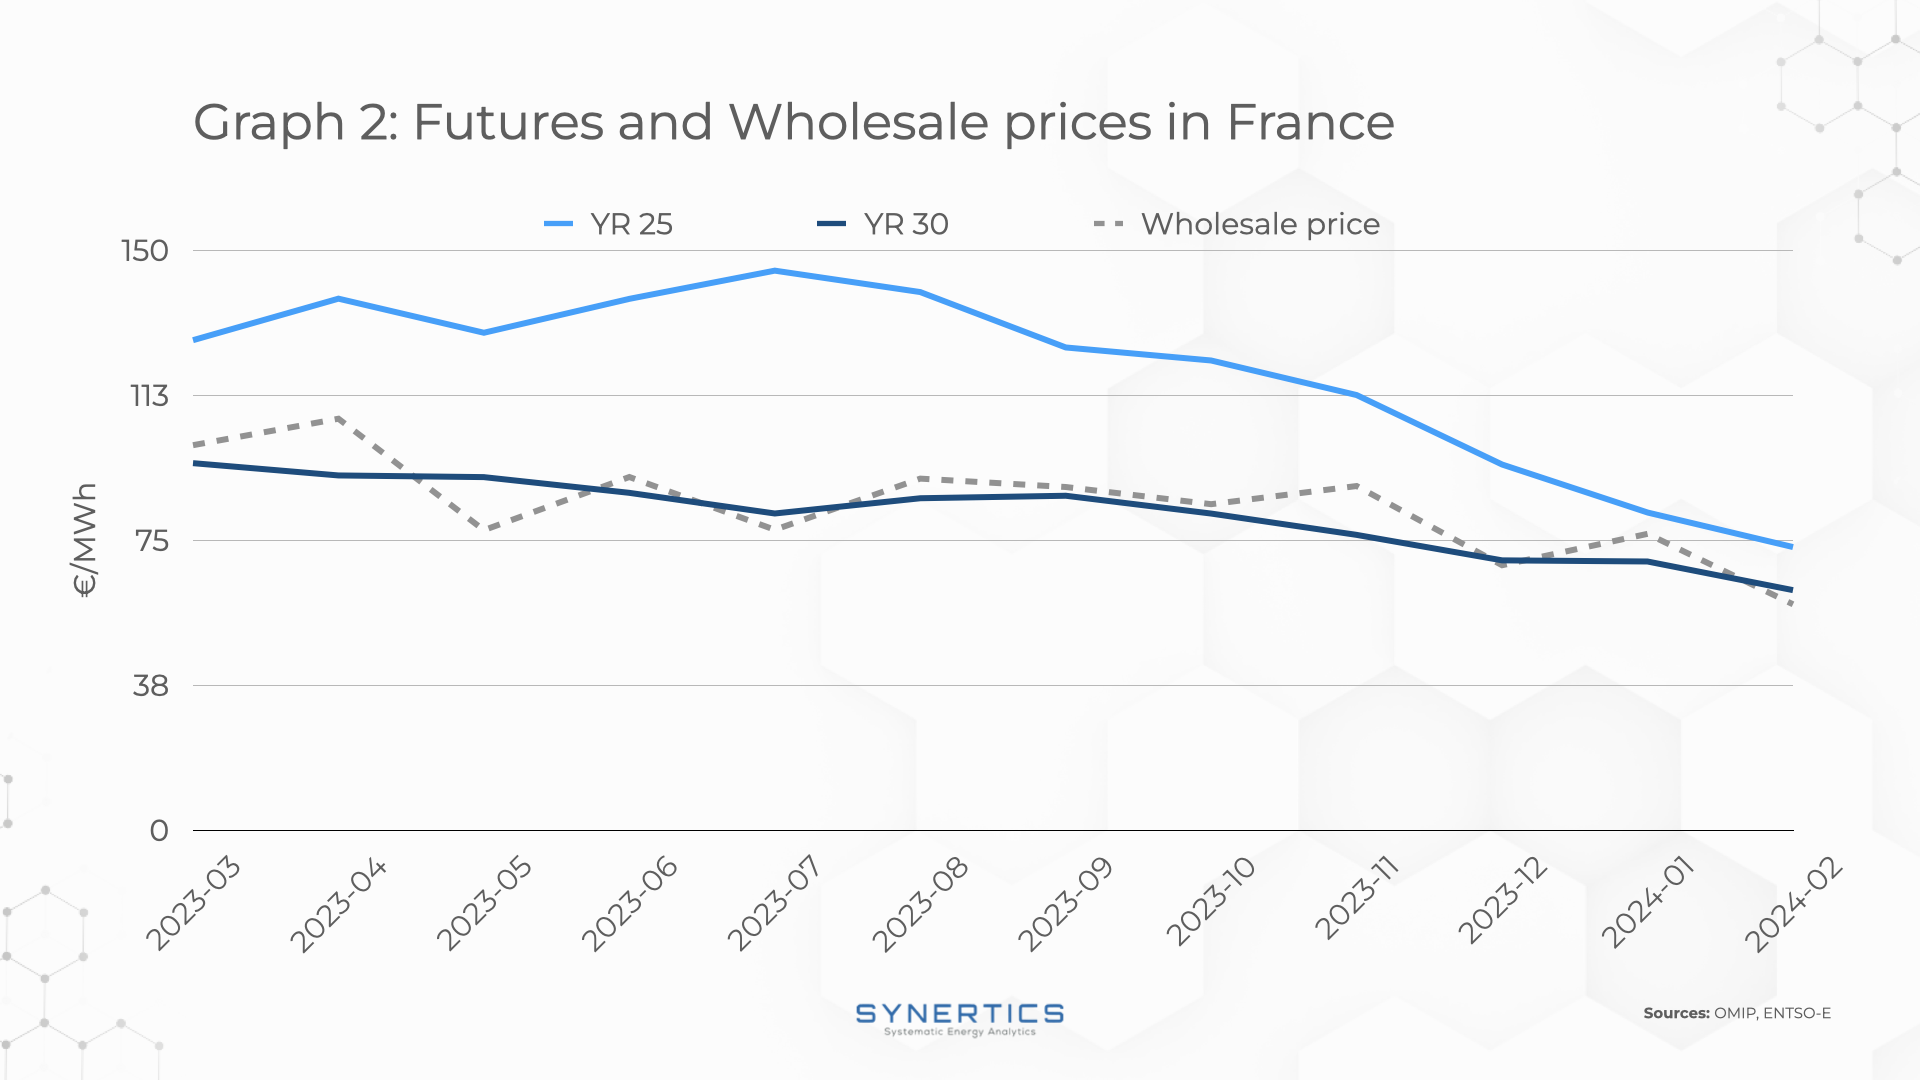 Futures and Wholesale prices in France